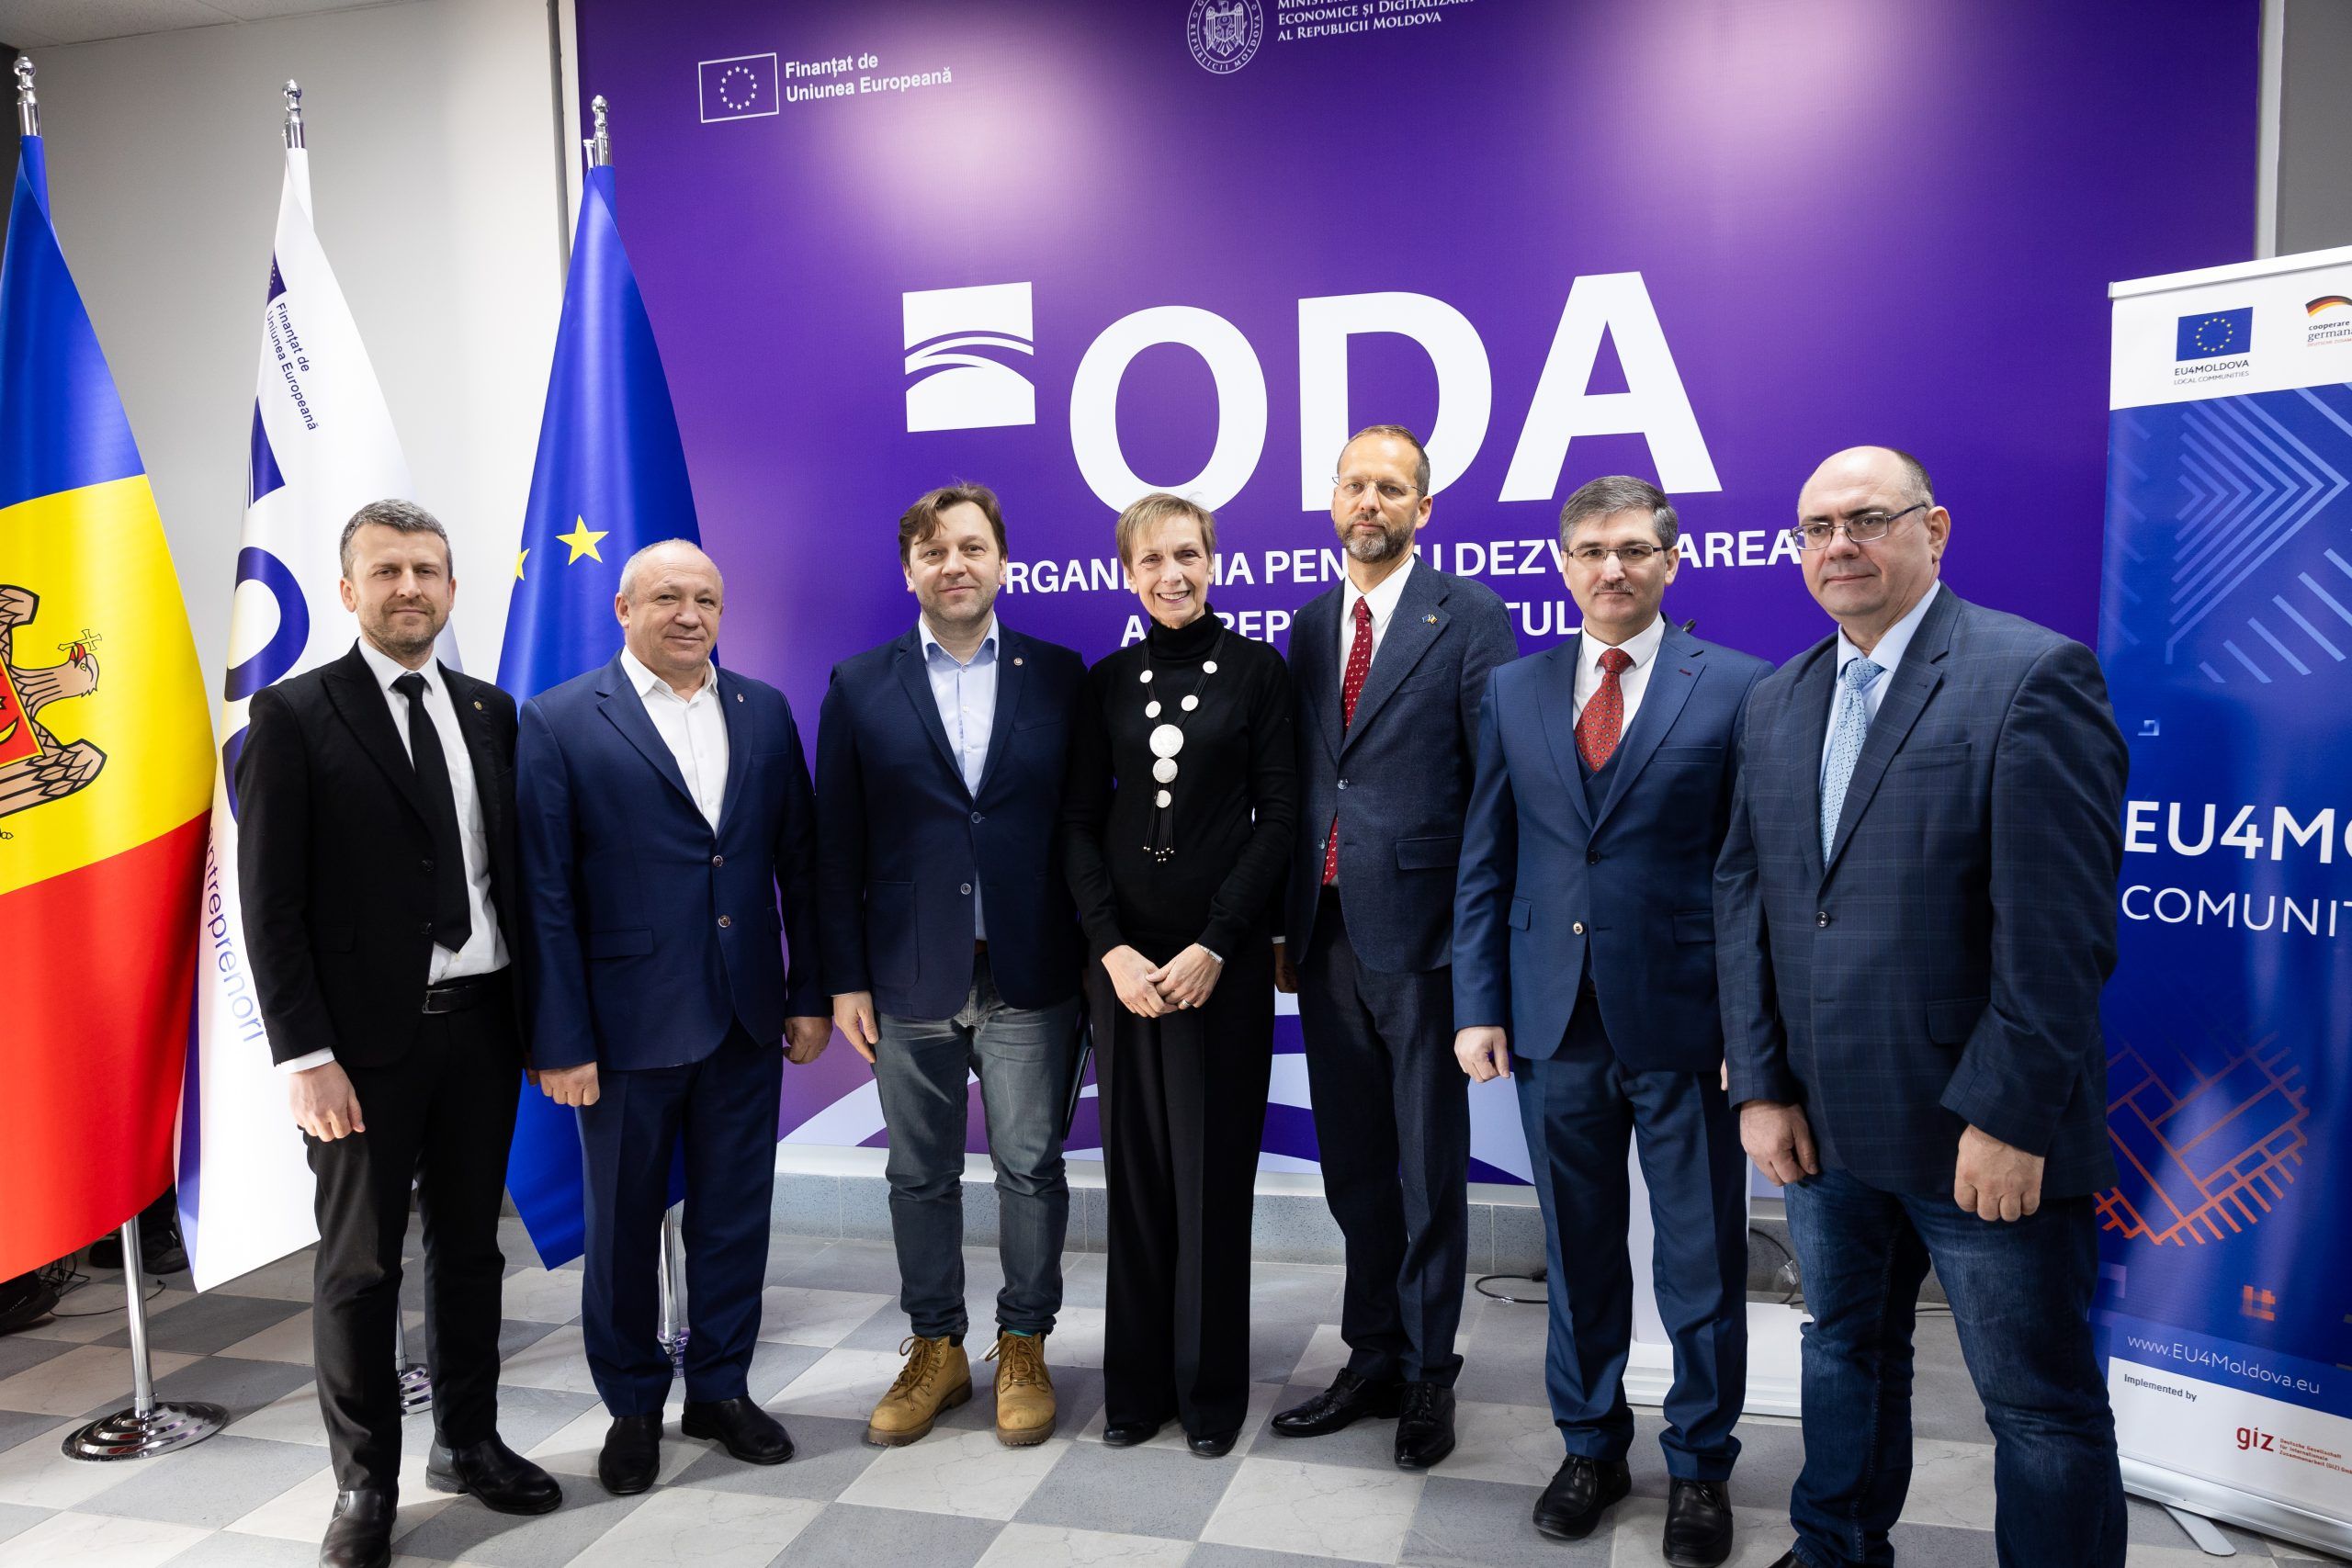 With the financial support of the European Union and the German Federal Ministry for Economic Cooperation and Development, the Business Information and Consulting Center ODA for entrepreneurs was inaugurated today in Bălți. The centre was opened by the Ministry of Economic Development and Digitalization together with the Organisation for the Development of Entrepreneurship (ODA).